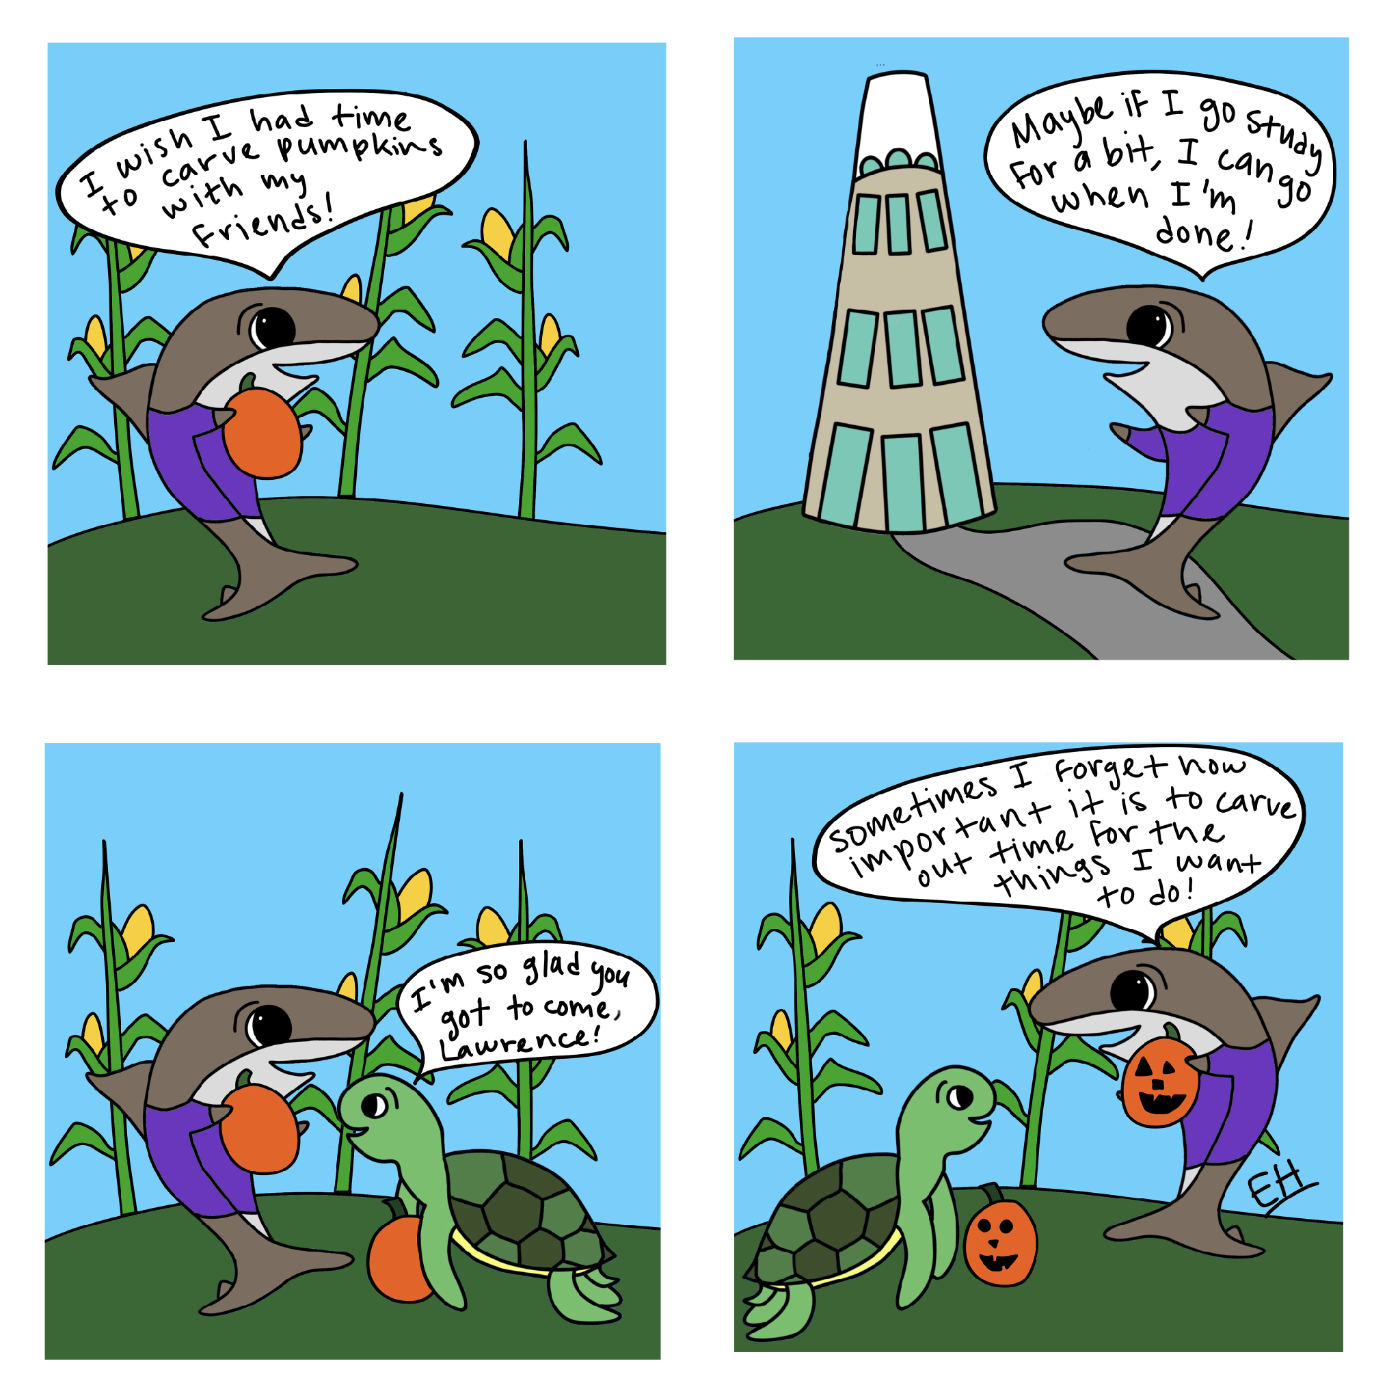 Lawrence is seen in a cornfield wearing a purple shirt, holding a pumpkin. He says, "I wish I had time to carve pumpkins with my friends." In the second panel he is seen on campus with the cone in the background. Lawrence says, "Maybe if I go study for a bit, I can go when I'm done!" In the third panel Lawrence is back in the cornfield, joined by Emily the sea turtle. They are both holding pumpkins. Emily says, "I'm so glad you got to come Lawrence!" In the final panel, their pumpkins have been carved, and Lawrence says, "Sometimes I forget how important it is to carve out time for the things I want to do!"